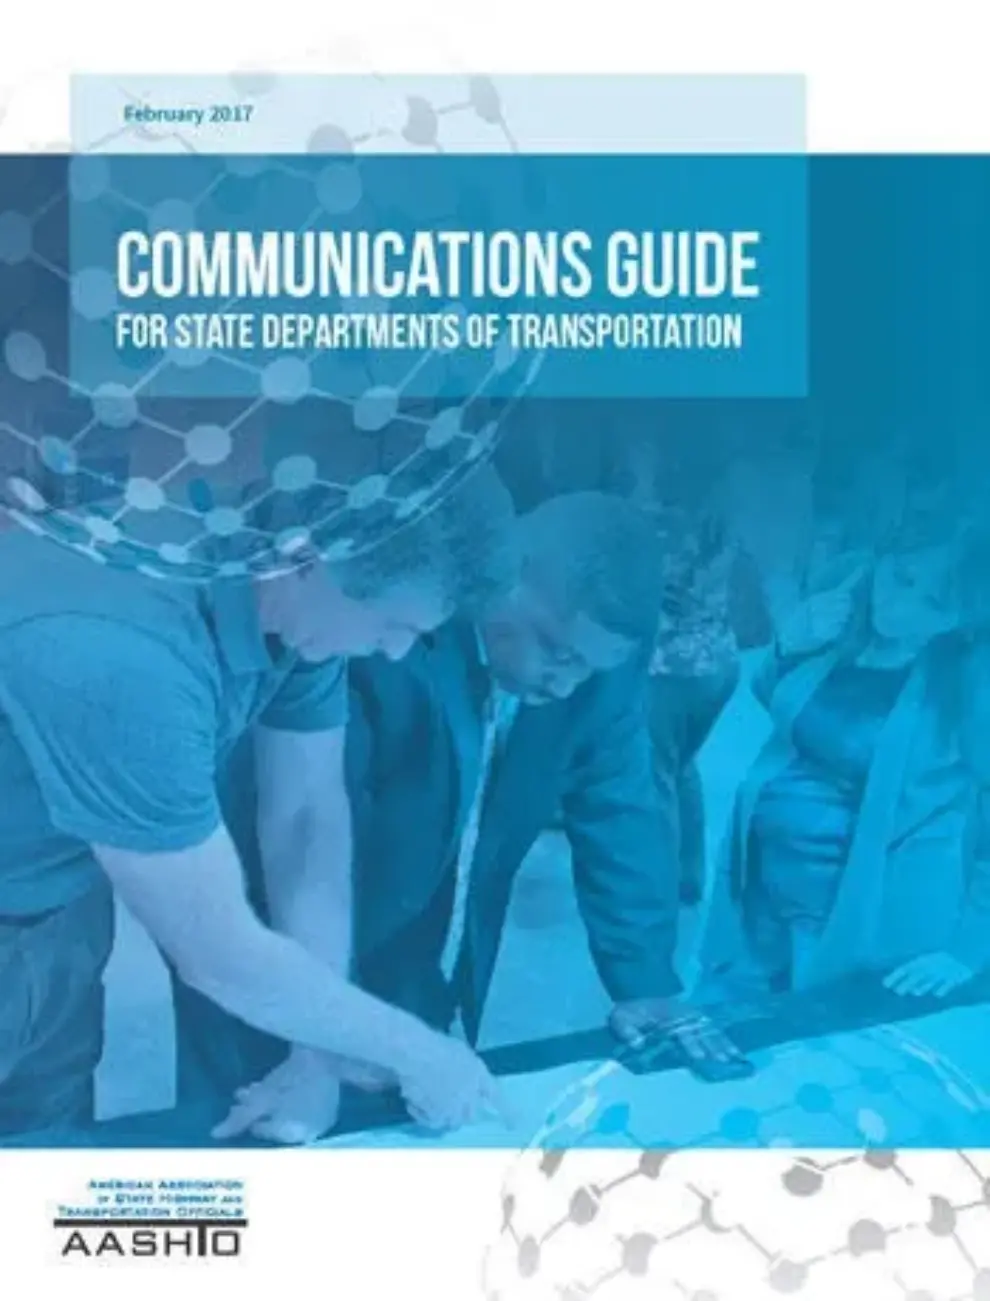 Guide helps state DOTs enhance communications